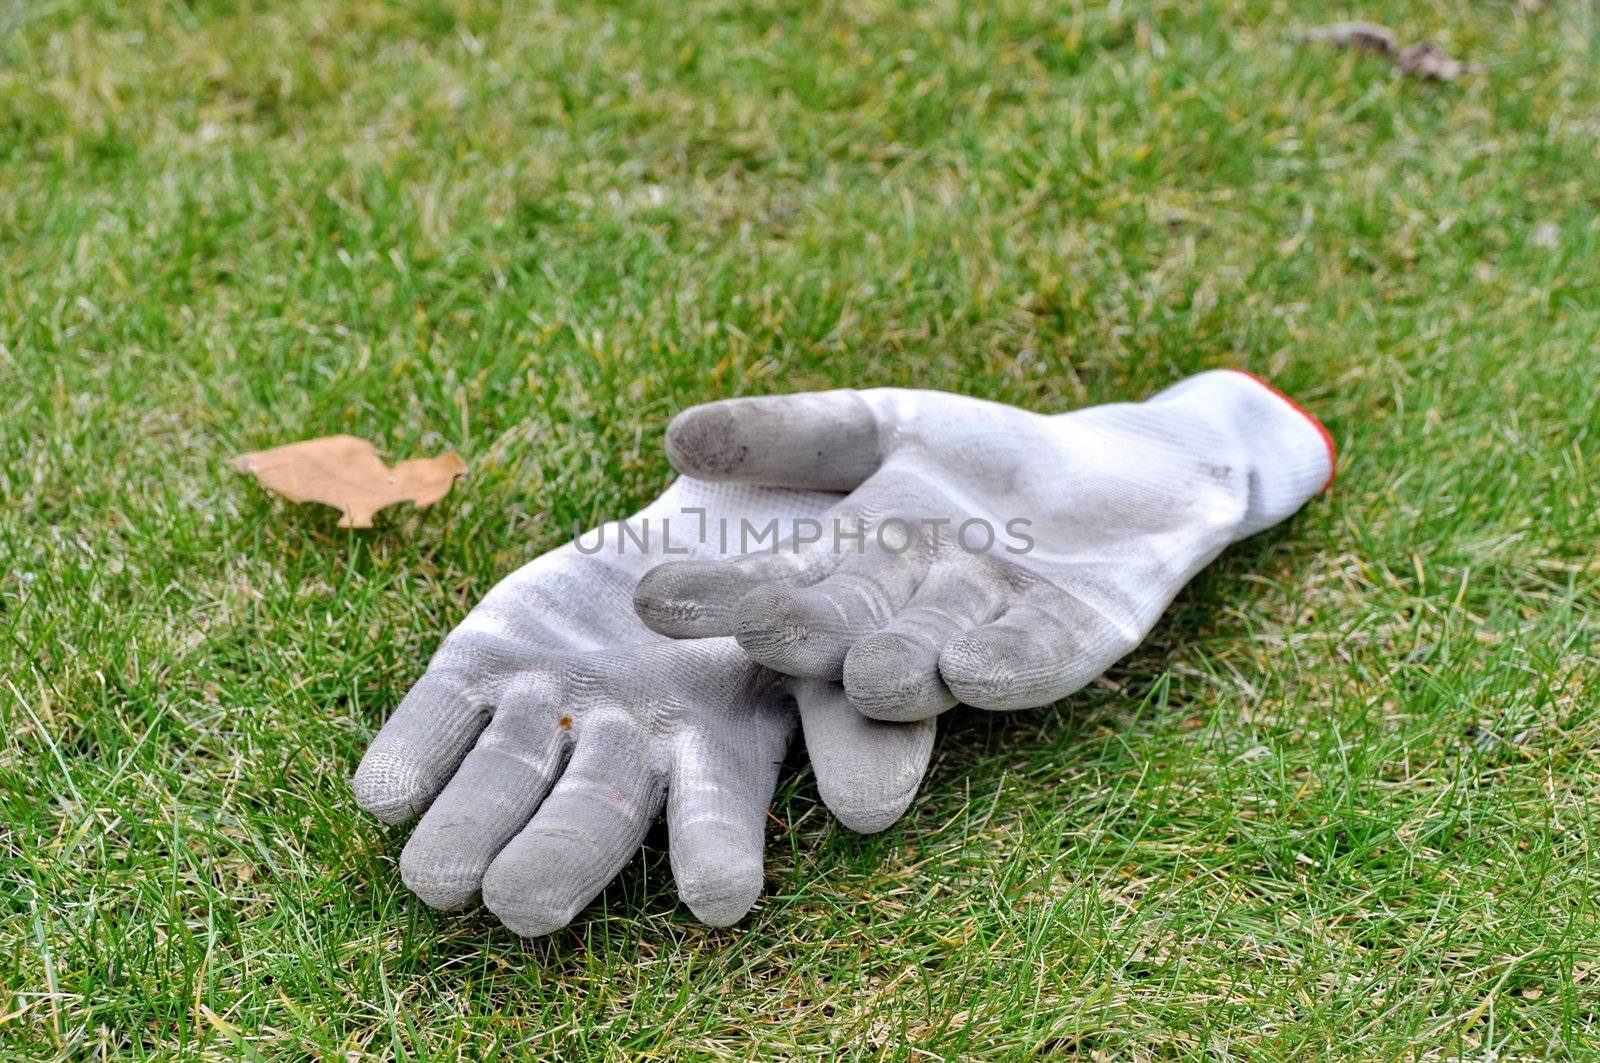 Dirty gardening gloves on the grass by anderm